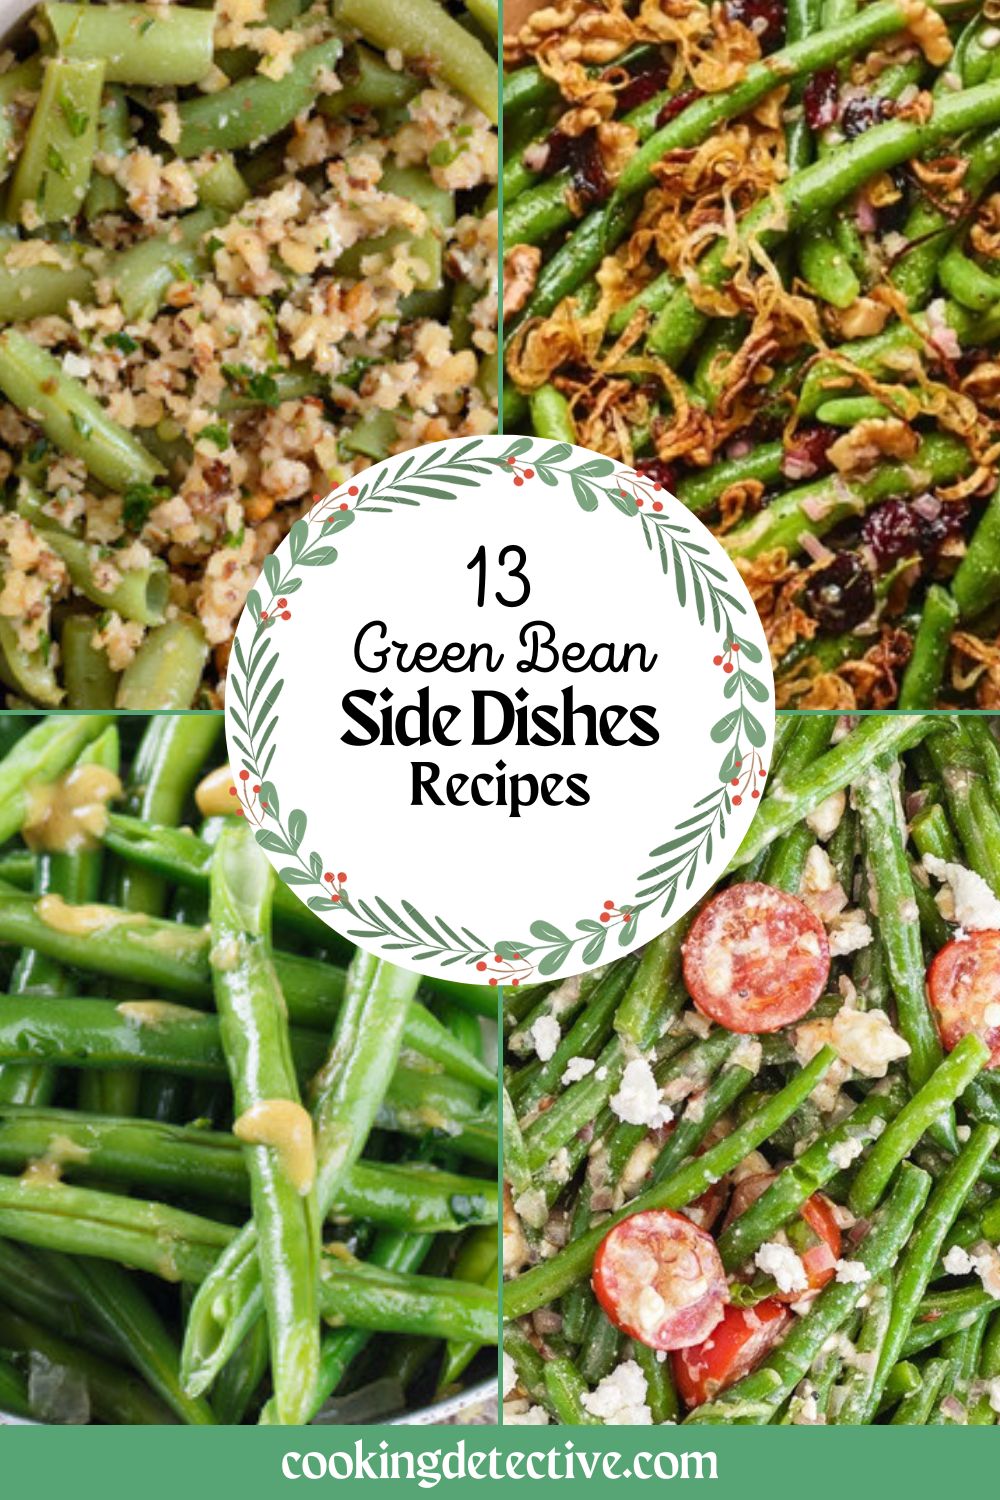 Green Bean Side Dishes Recipes